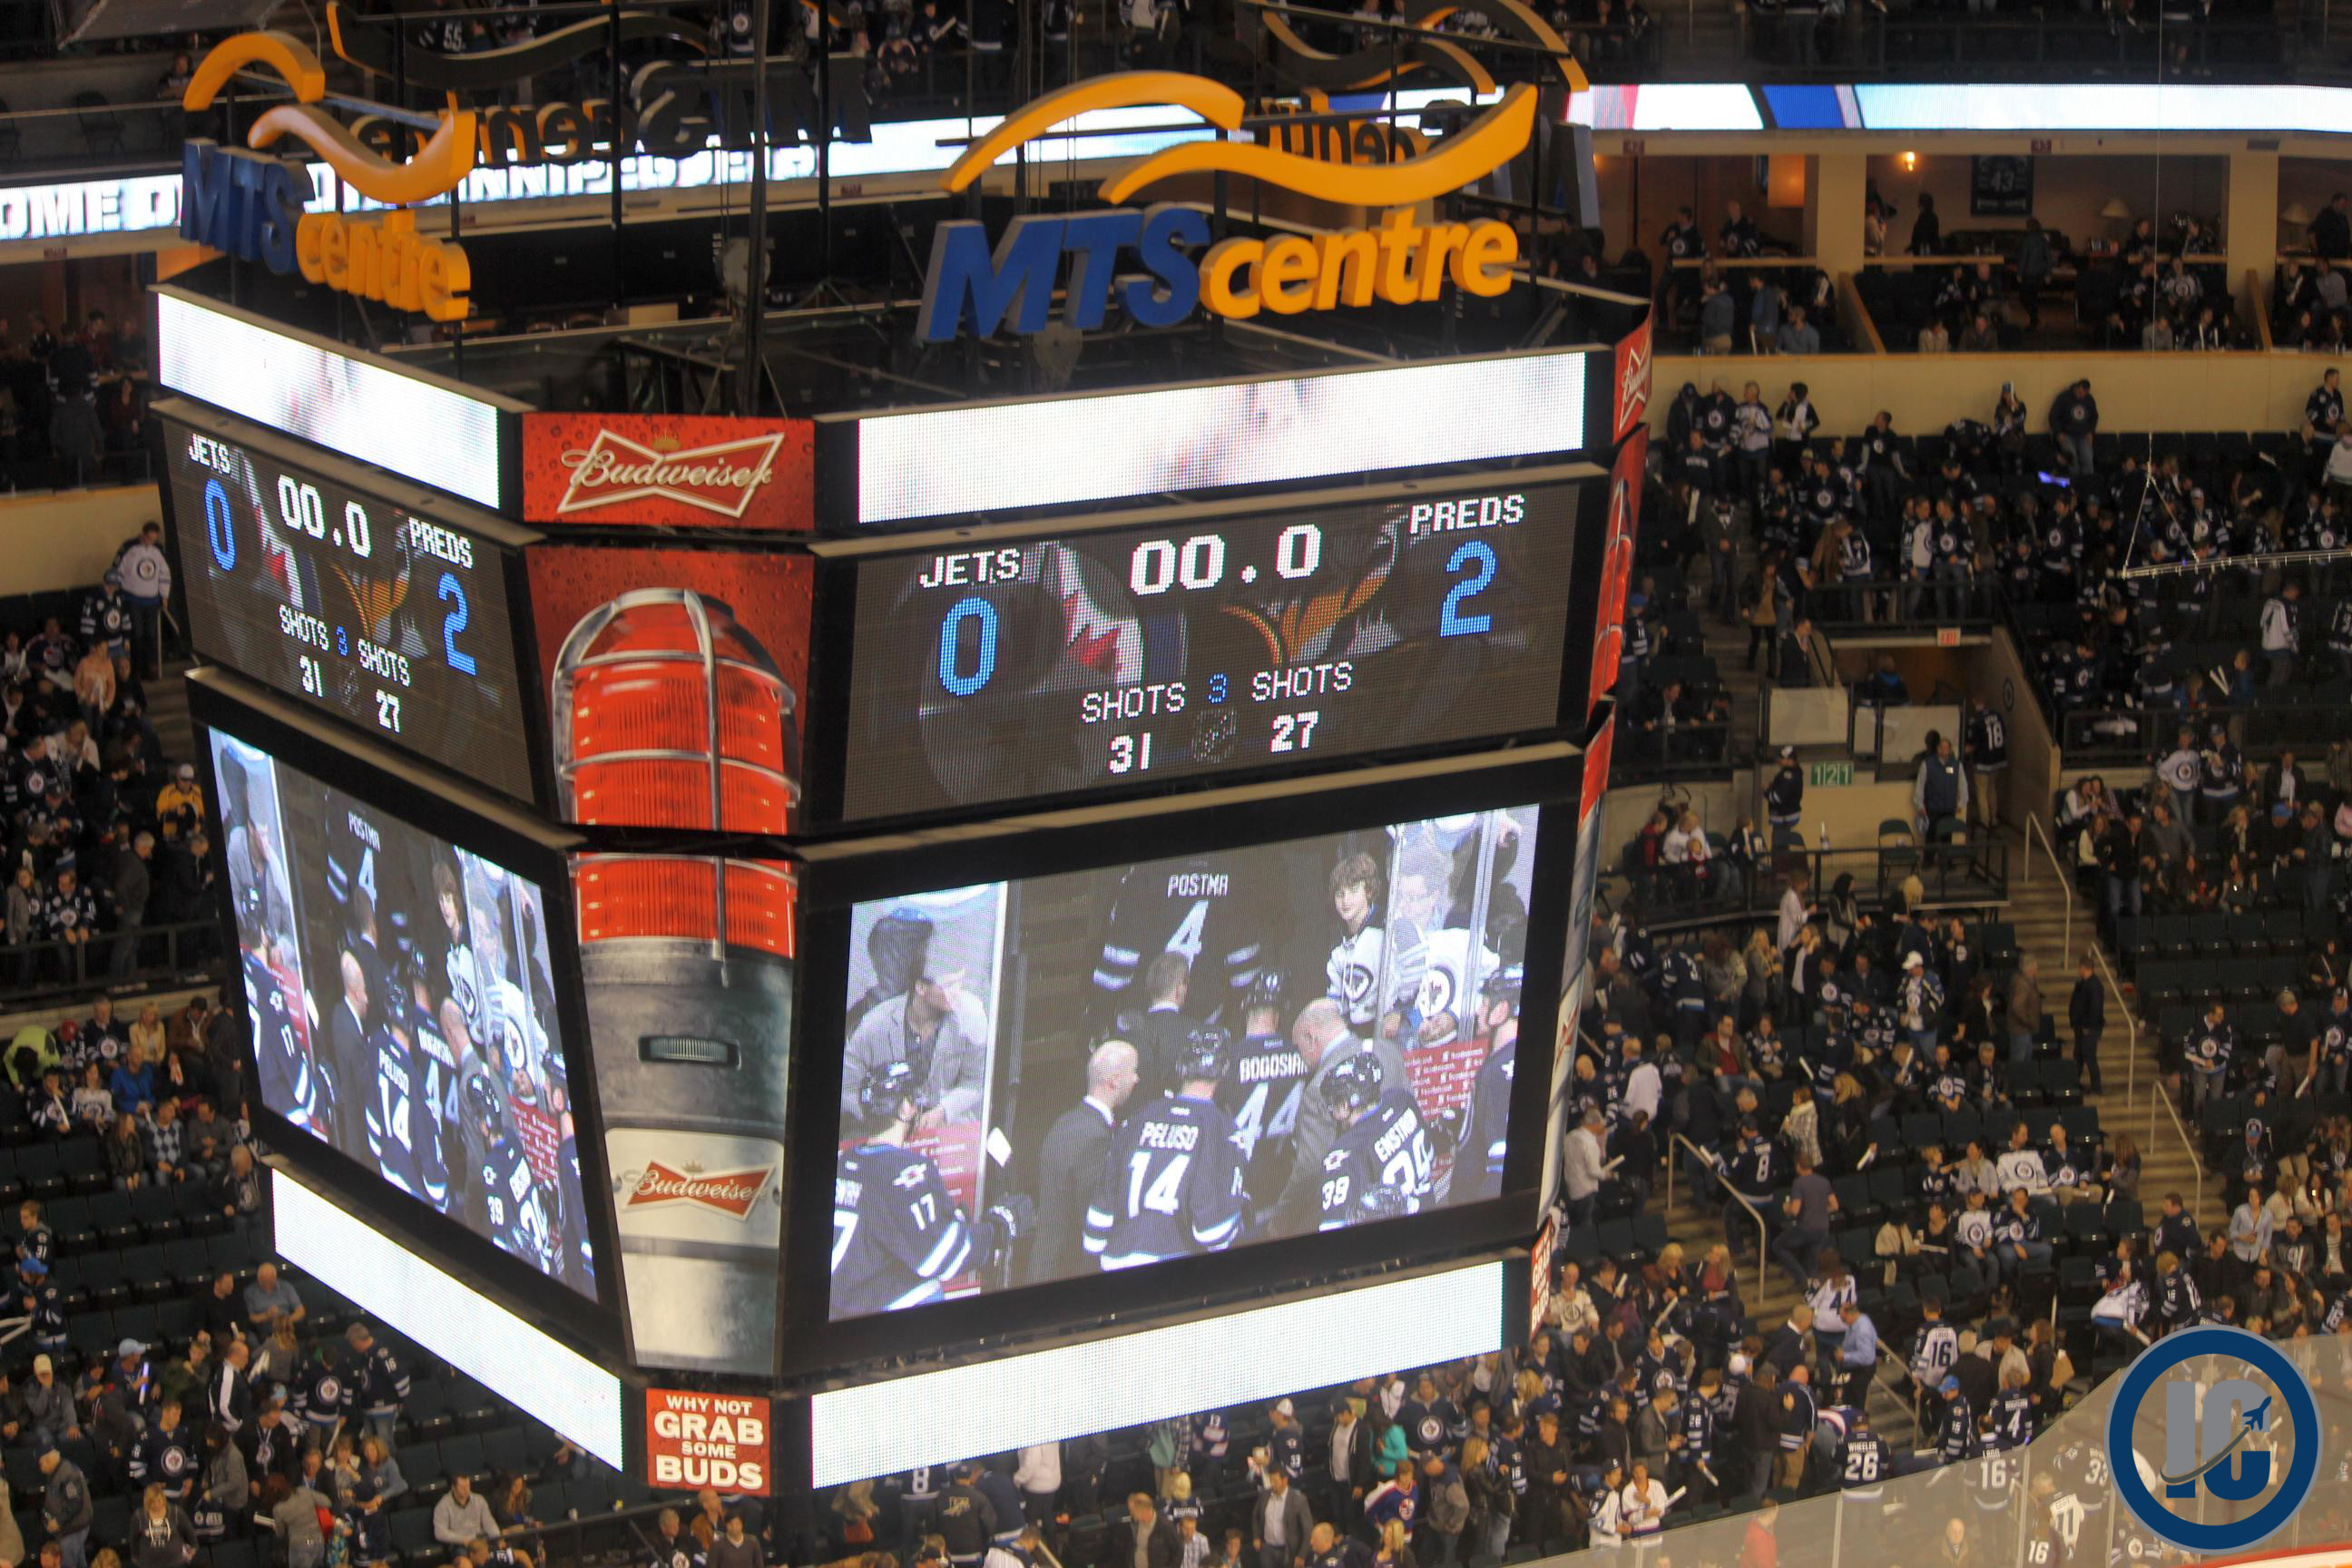 Jets lose 2 0 to Preds Oct 17 2014